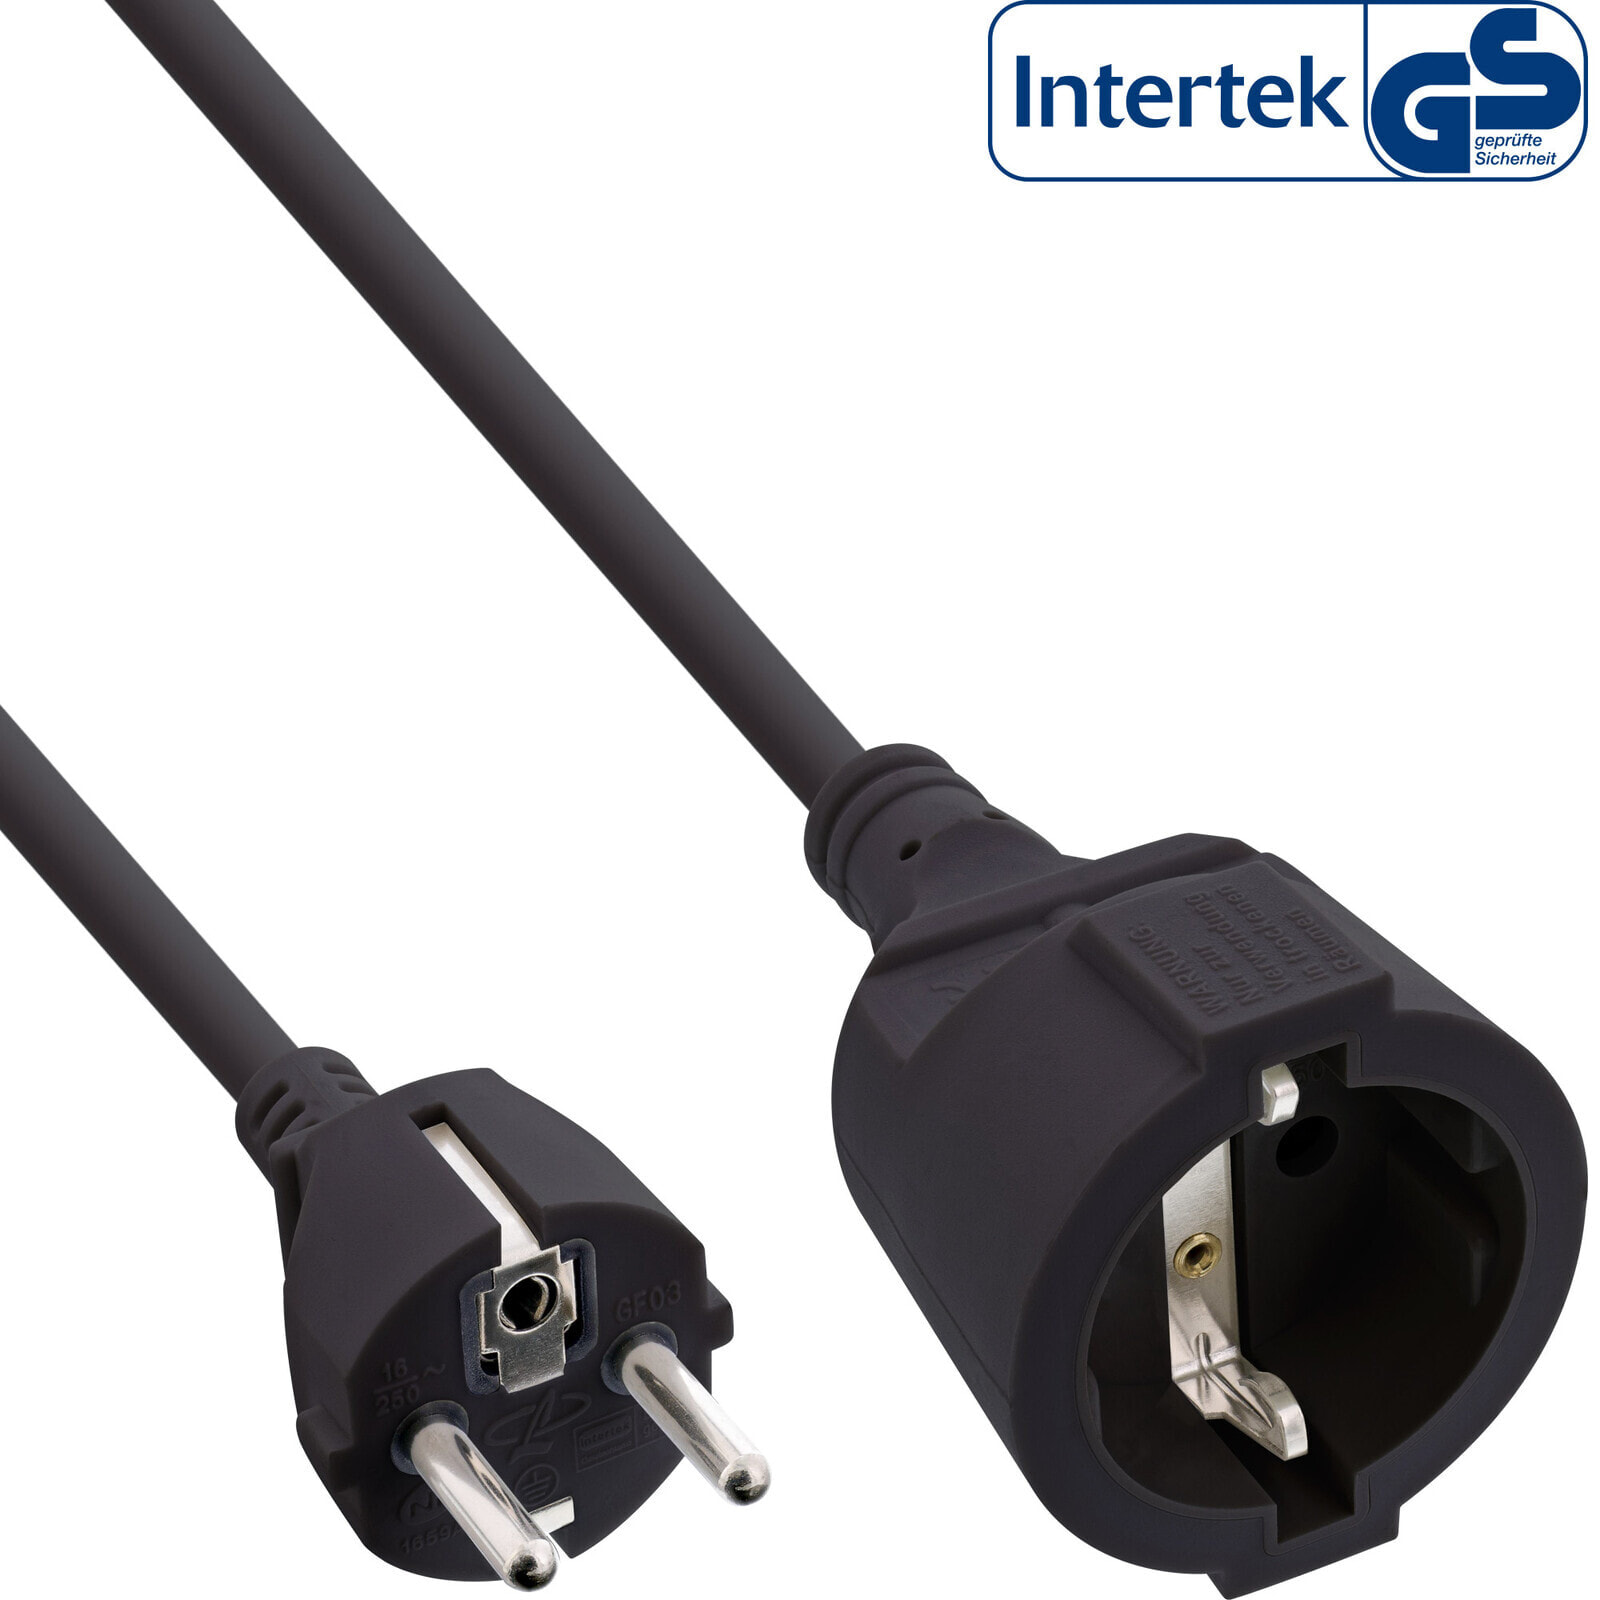 Power extension cable - black - 15m - with child safety